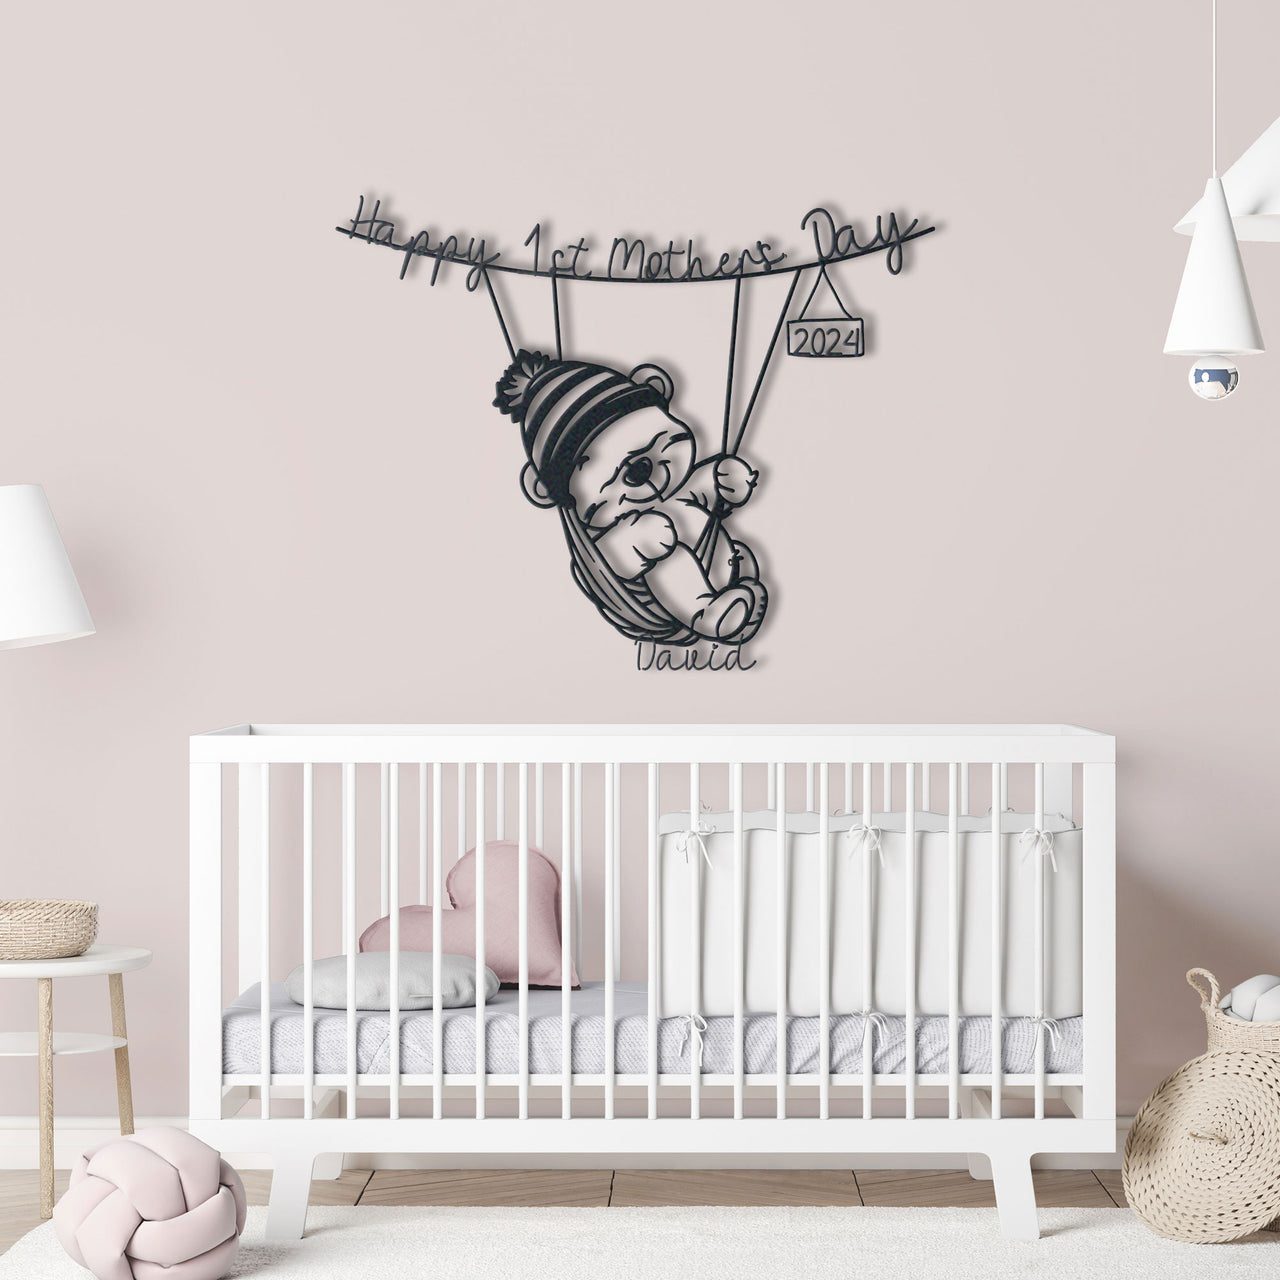 Family Custom Metal Wall Art Cute Cub Happy First Mother's Day 2